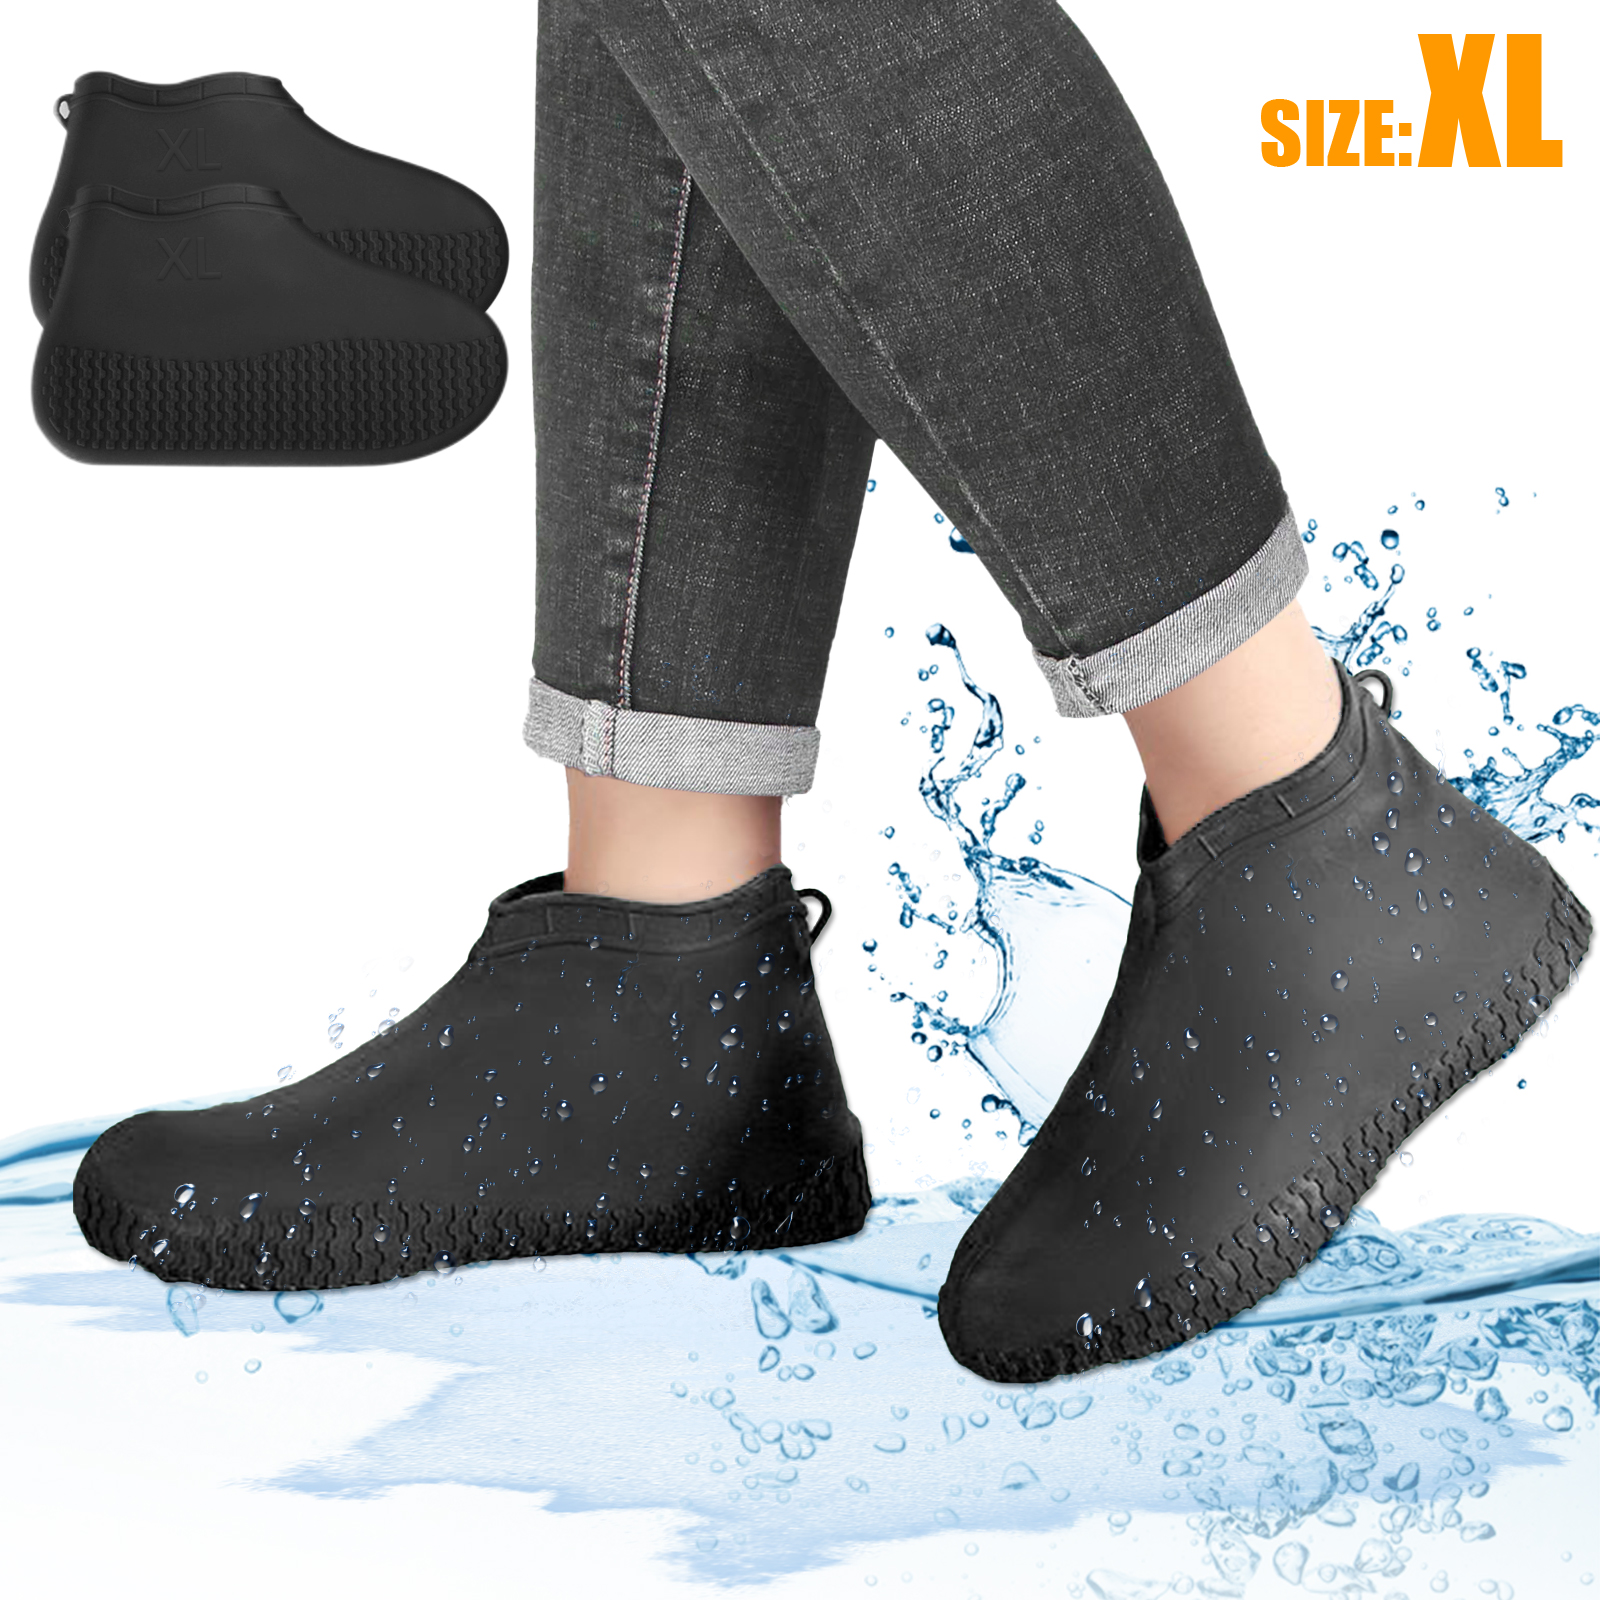 Details about   Waterproof Rain Shoe Covers Shoes Gear Overshoes Reusable Boot Anti-slip Lin 